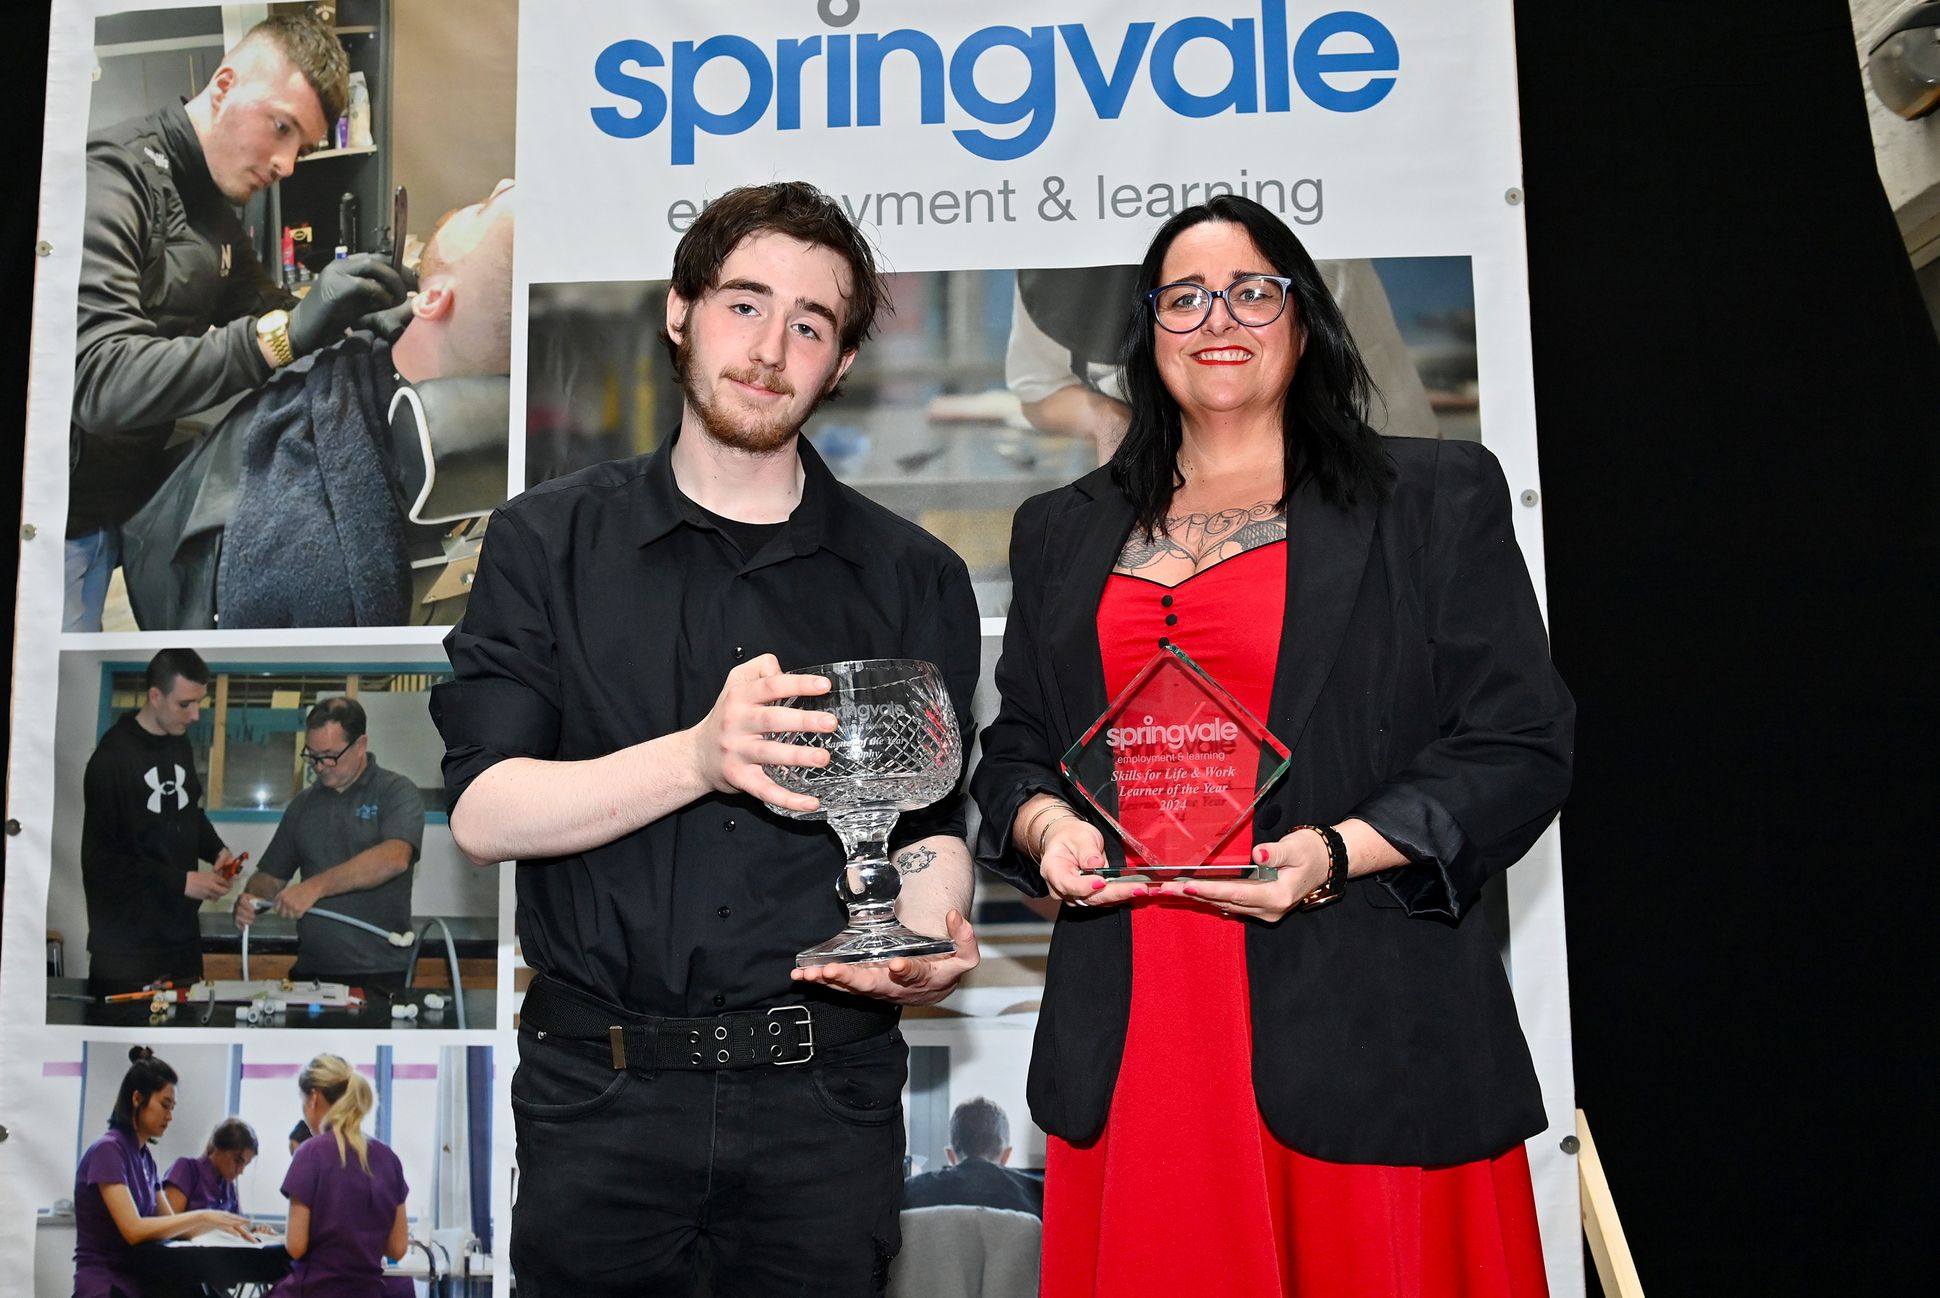 Colin Wilson (Skills For Life and Work Learner of the Year) is presented with his award by Shelly Higgins (Programme Manager at Springvale Learning).